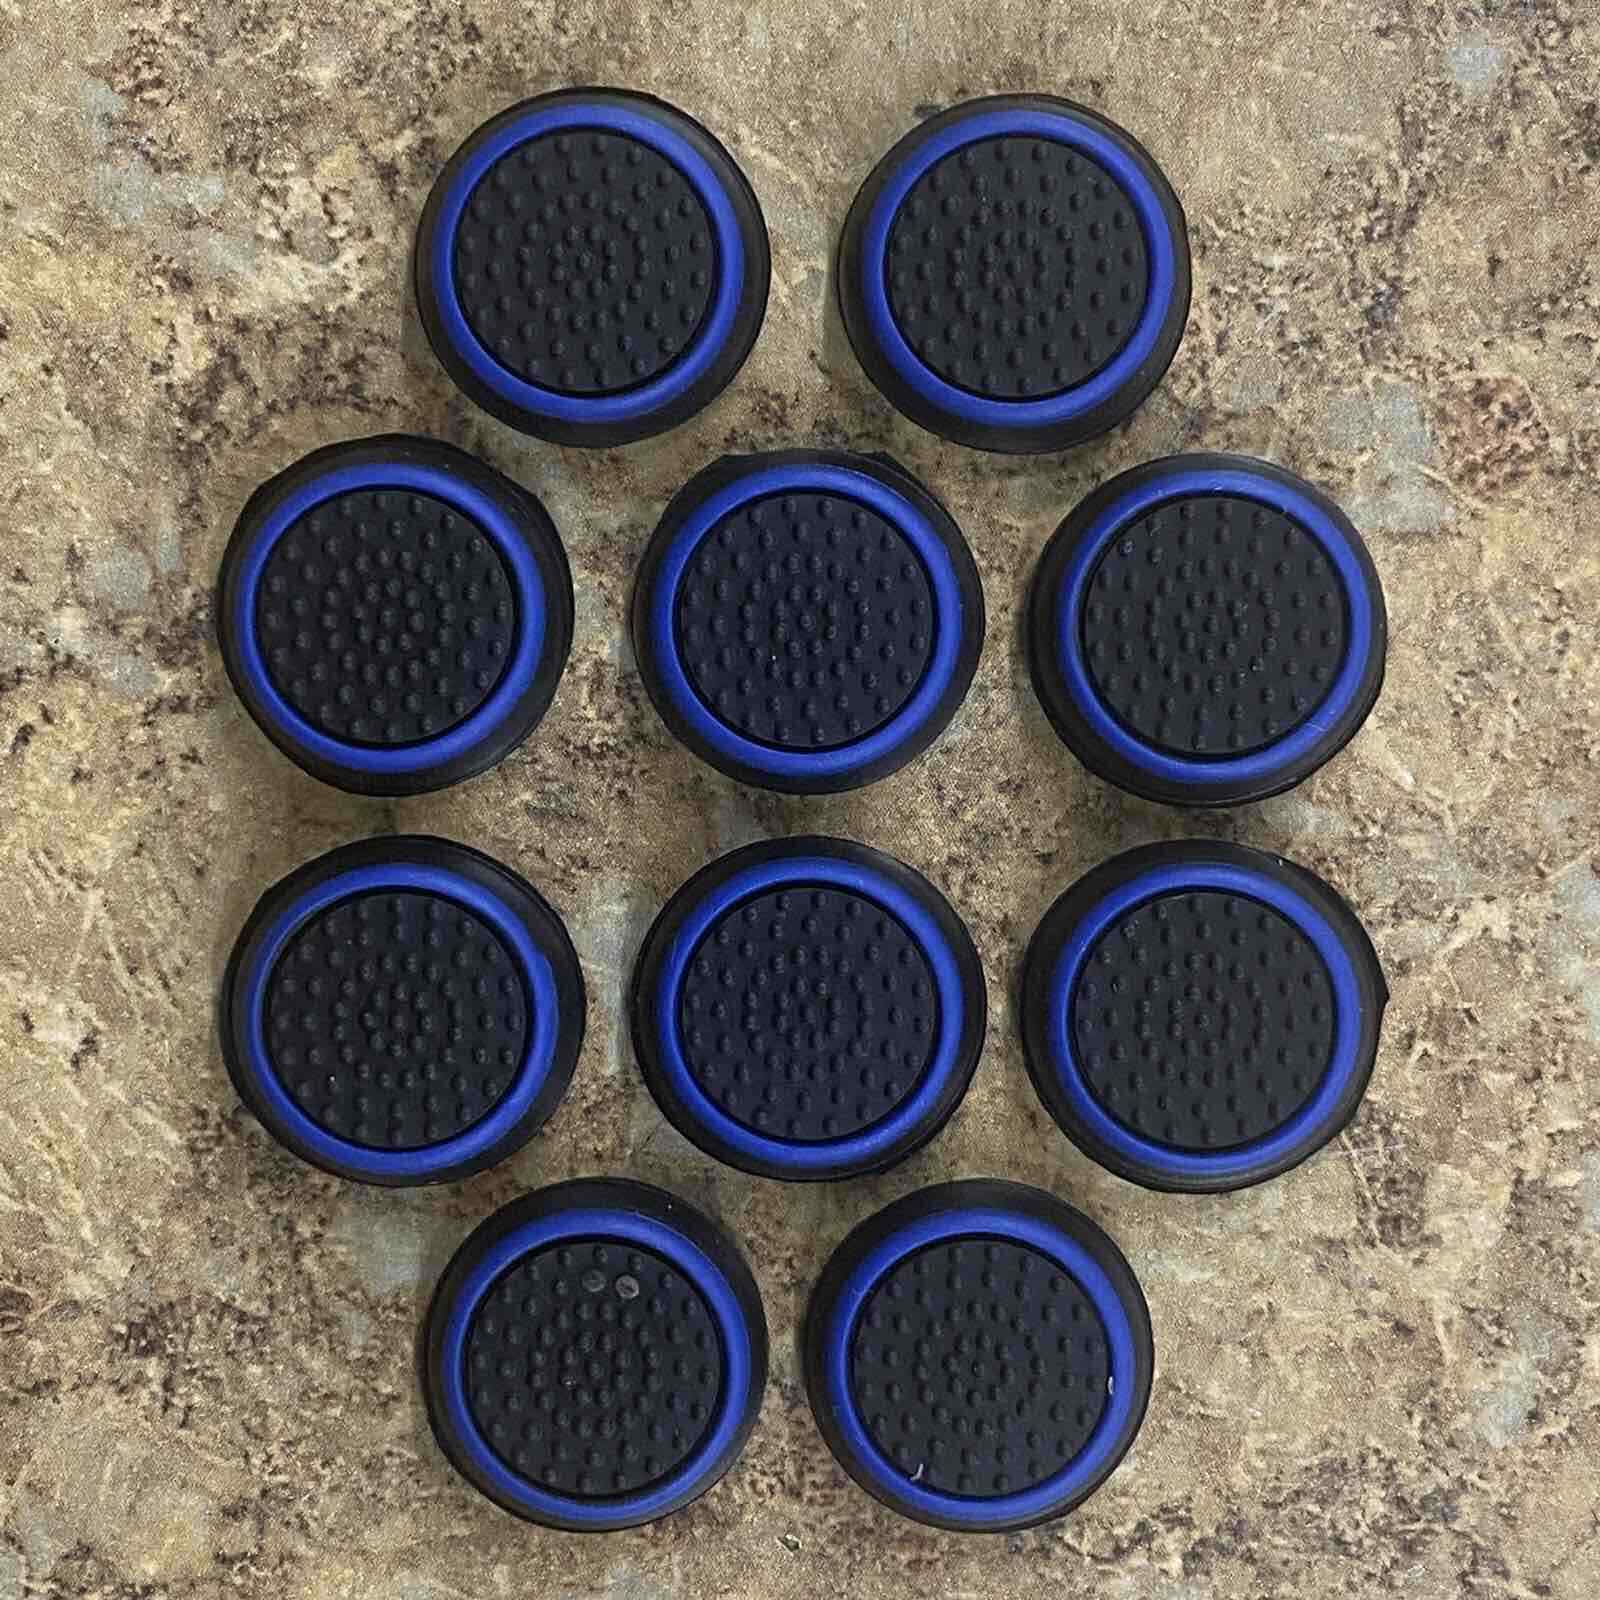 10x Analog Controller Thumb Stick Grip Thumbstick Cap Cover For Ps4 Xbox One 360